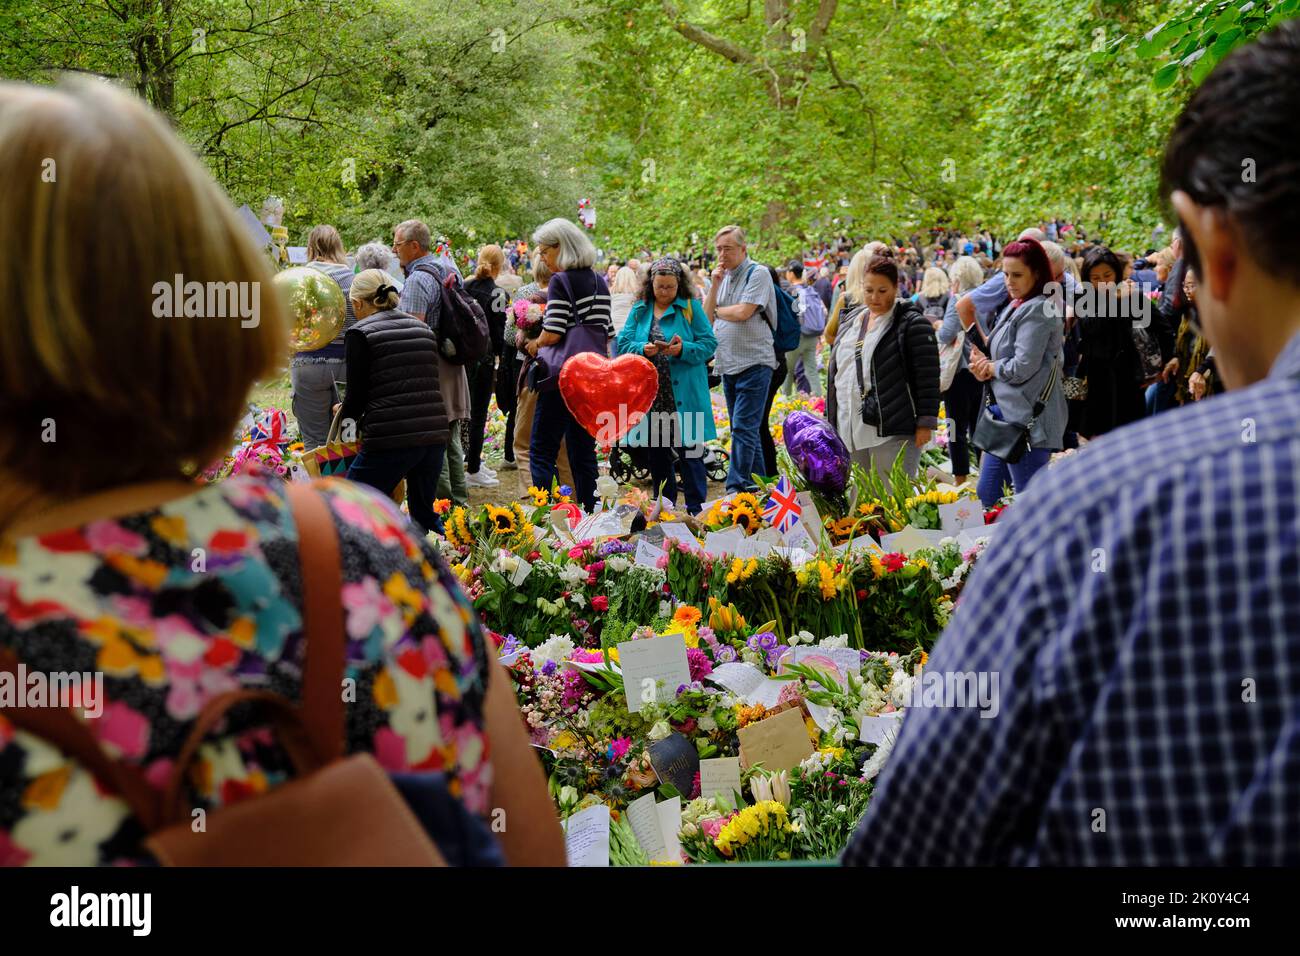 Public bringing flowers to Green Park in a floral tribute following the death of the Queen Stock Photo